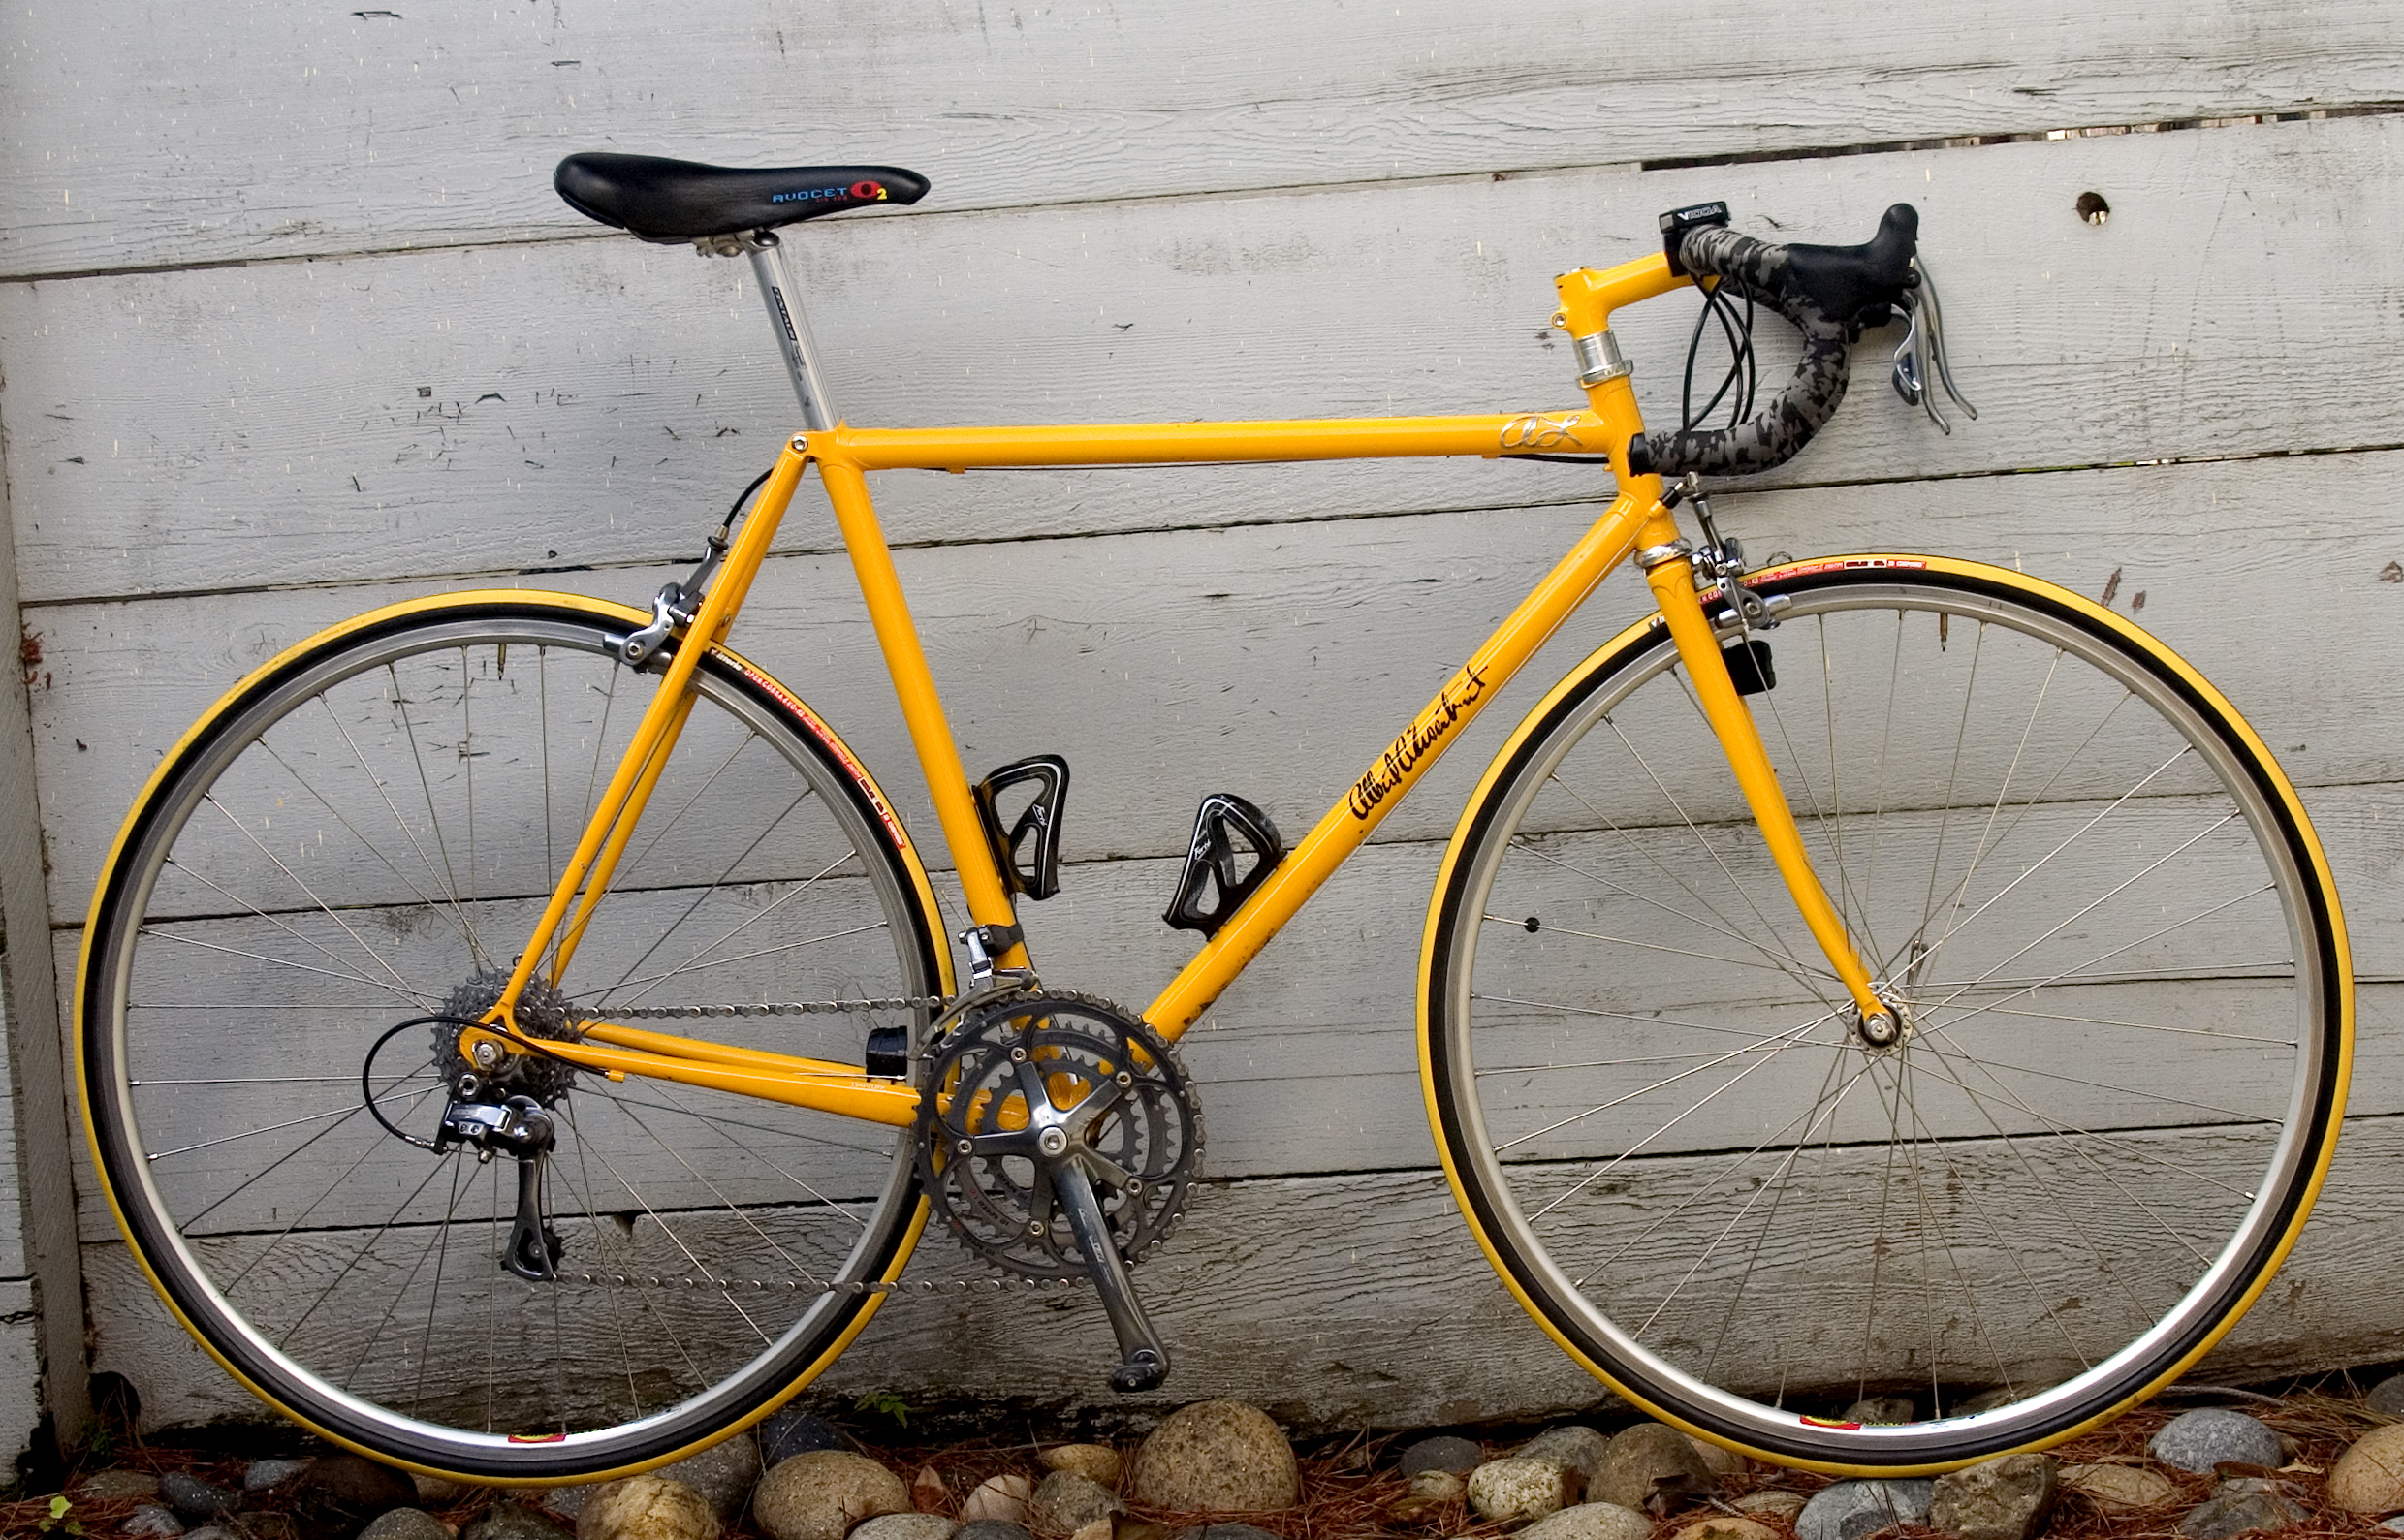 What road bike do you have? - Page 83 - Bike Forums